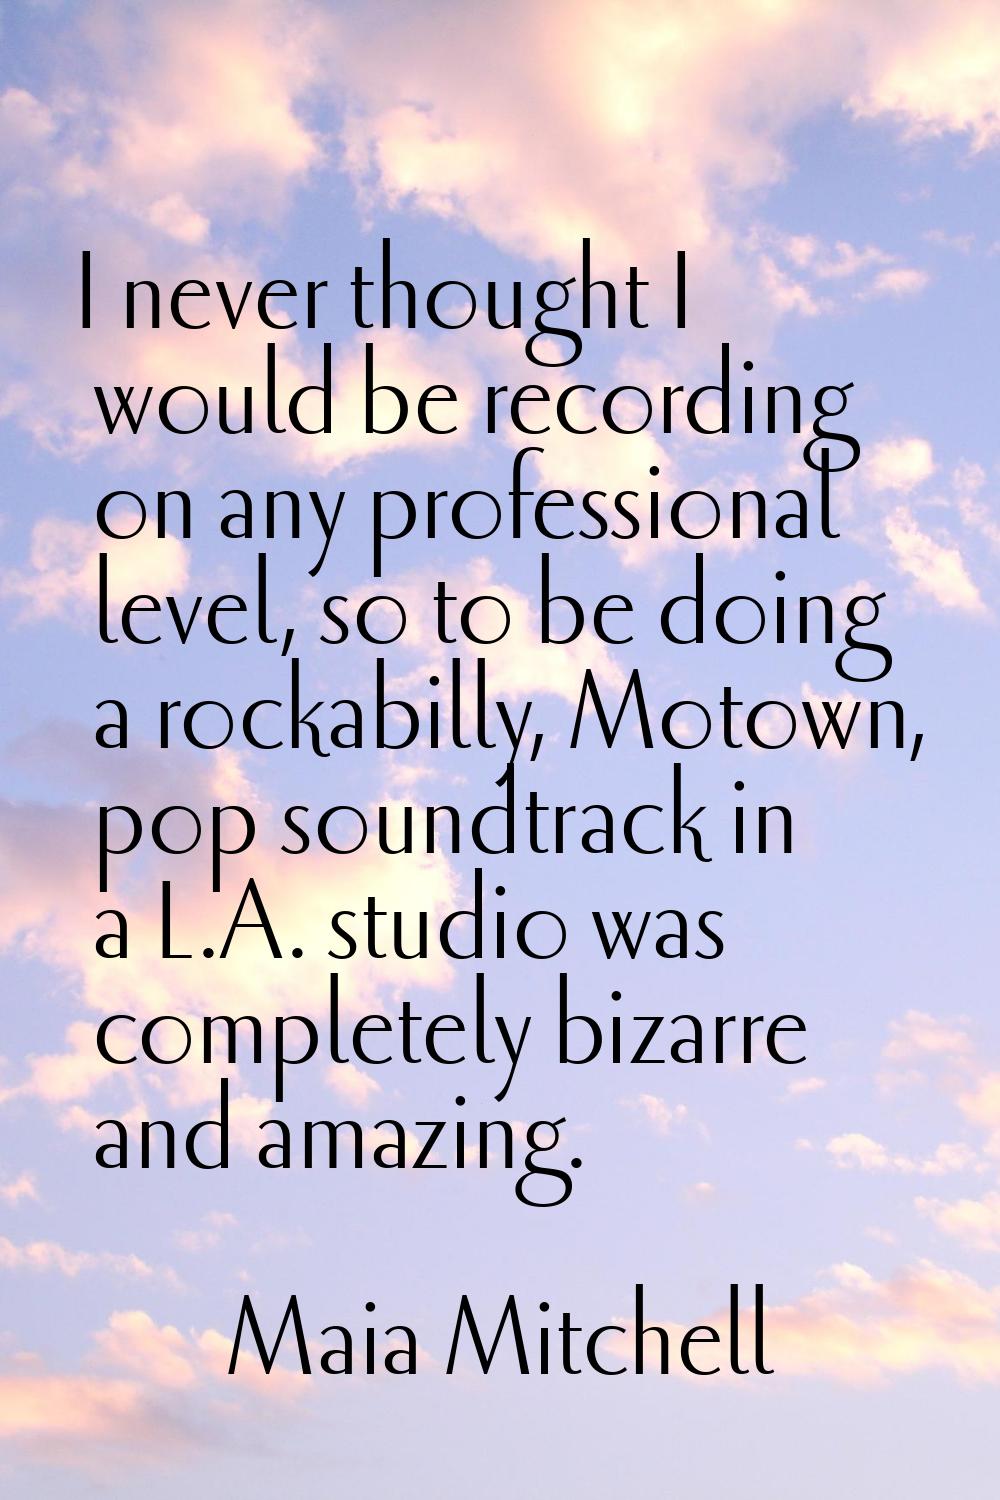 I never thought I would be recording on any professional level, so to be doing a rockabilly, Motown